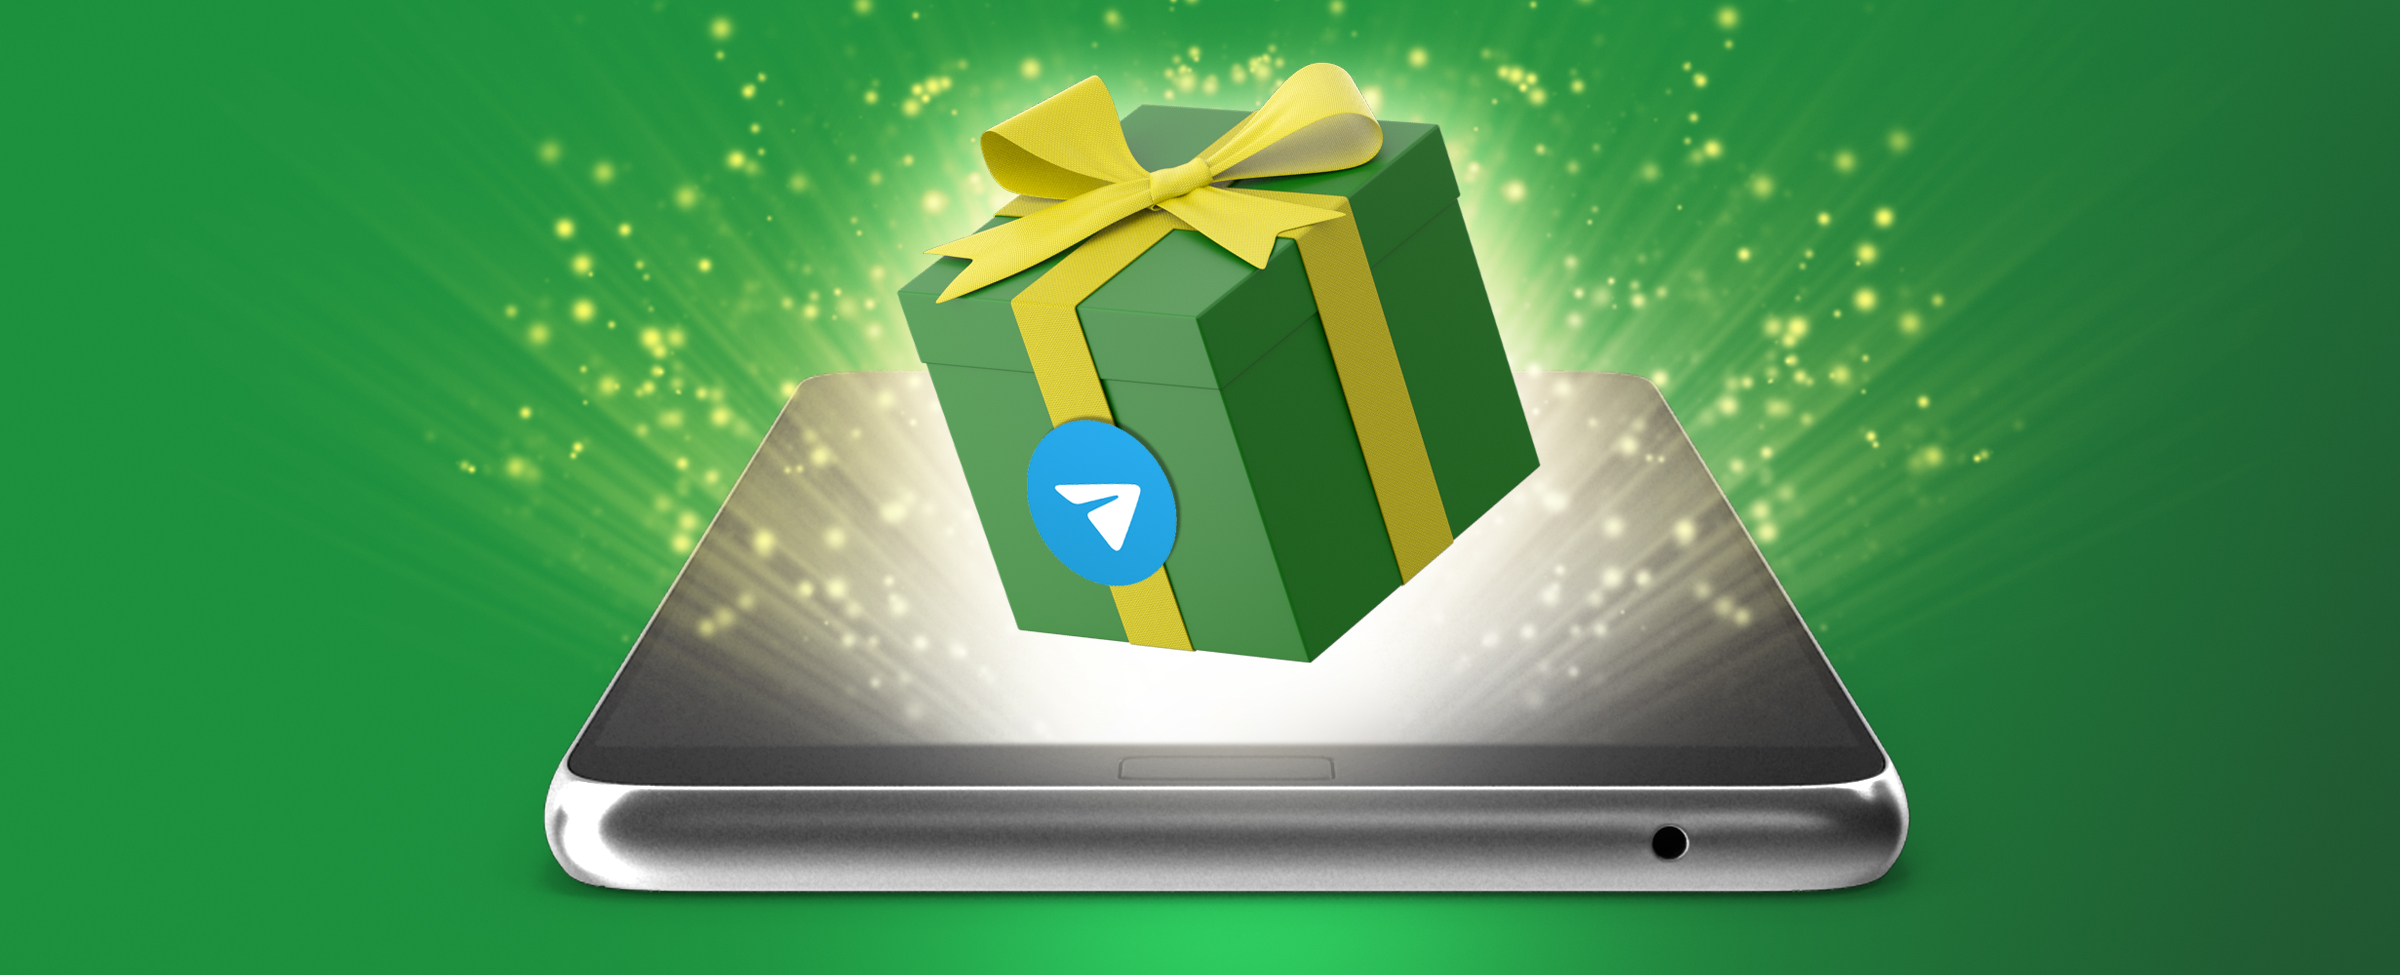 A present box and Telegram logo coming out of a mobile phone screen on a green background